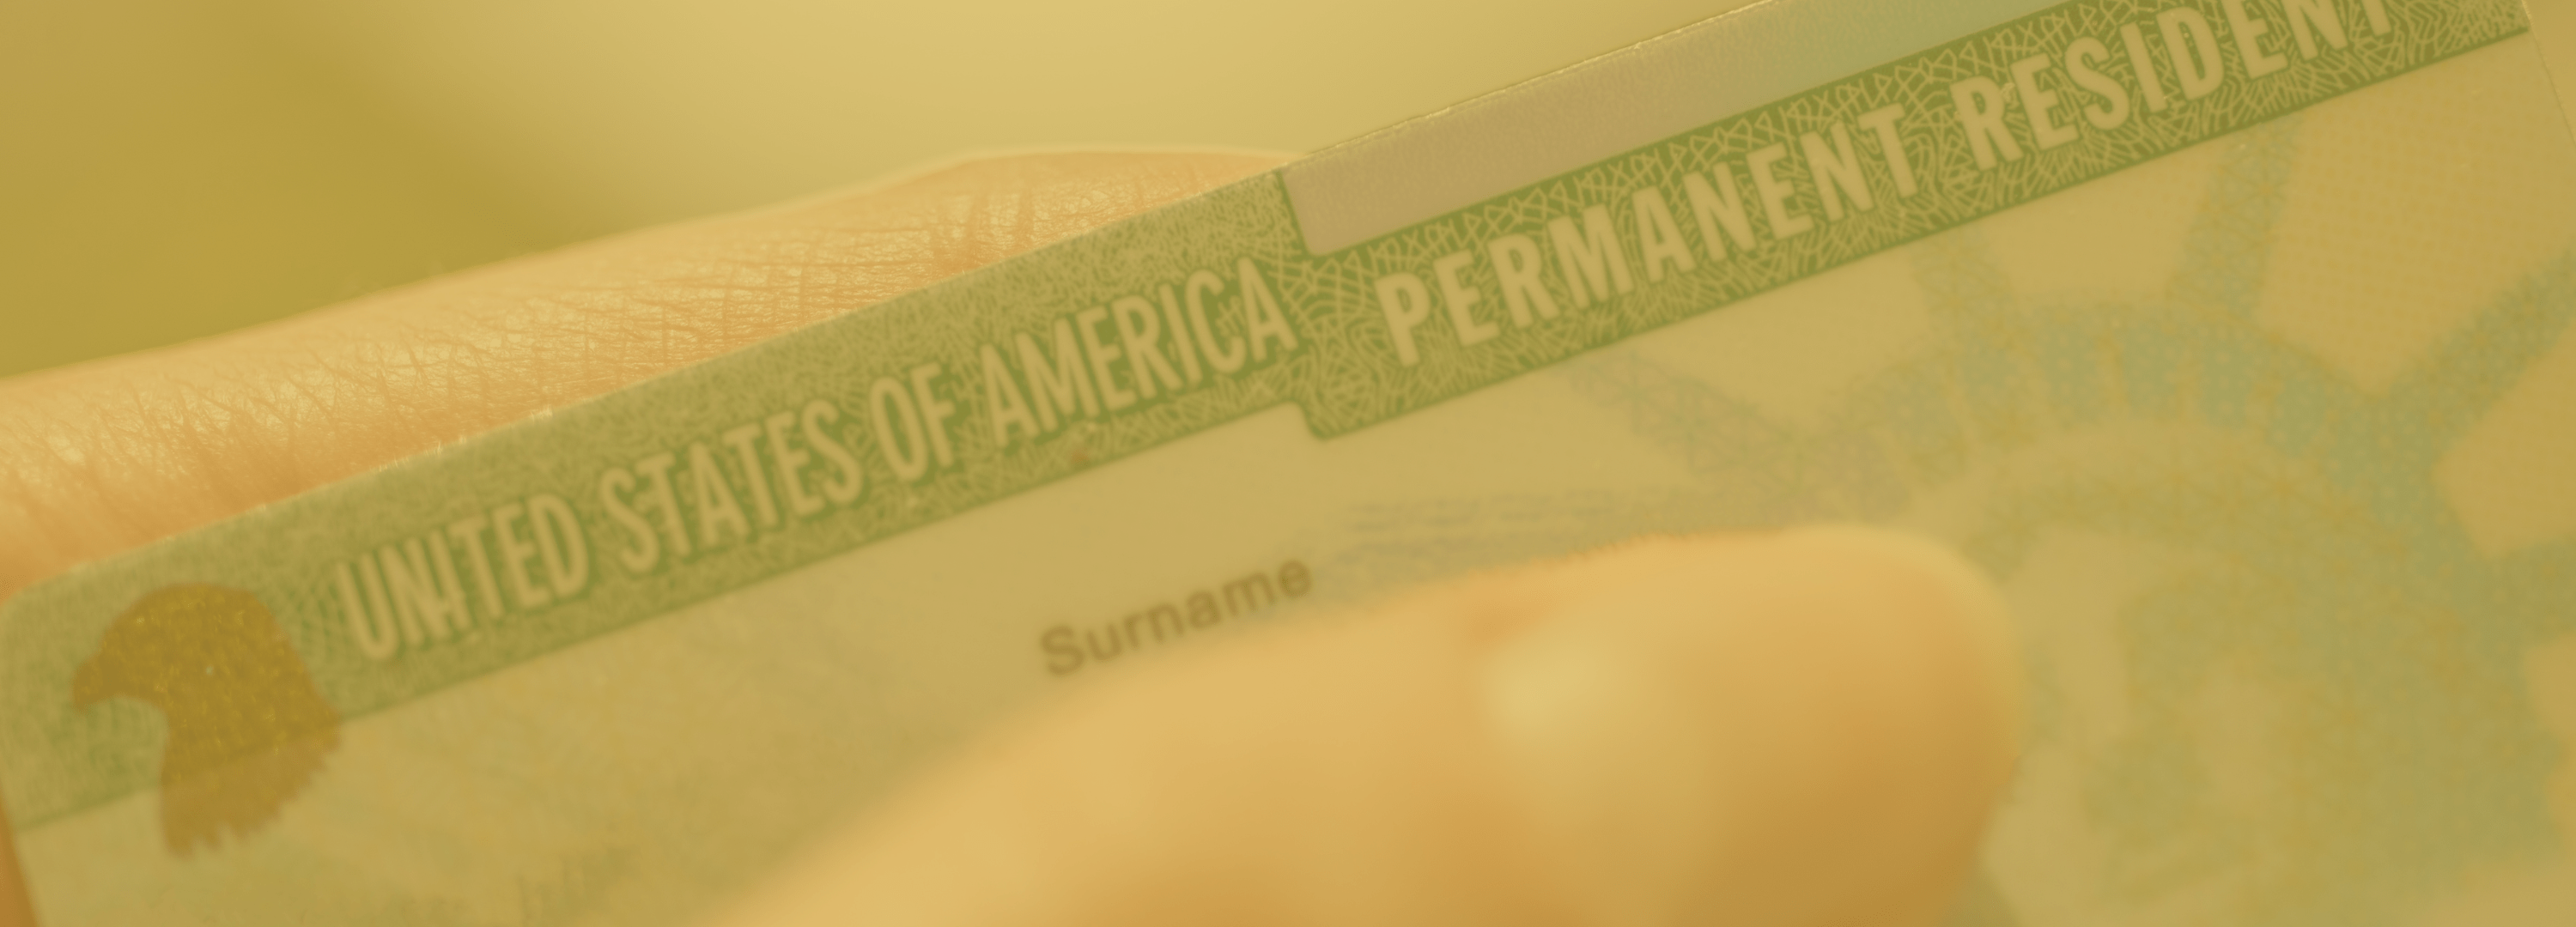 YES, YOU CAN GET A GREEN CARD WITHOUT HAVING A US CITIZEN FAMILY MEMBER